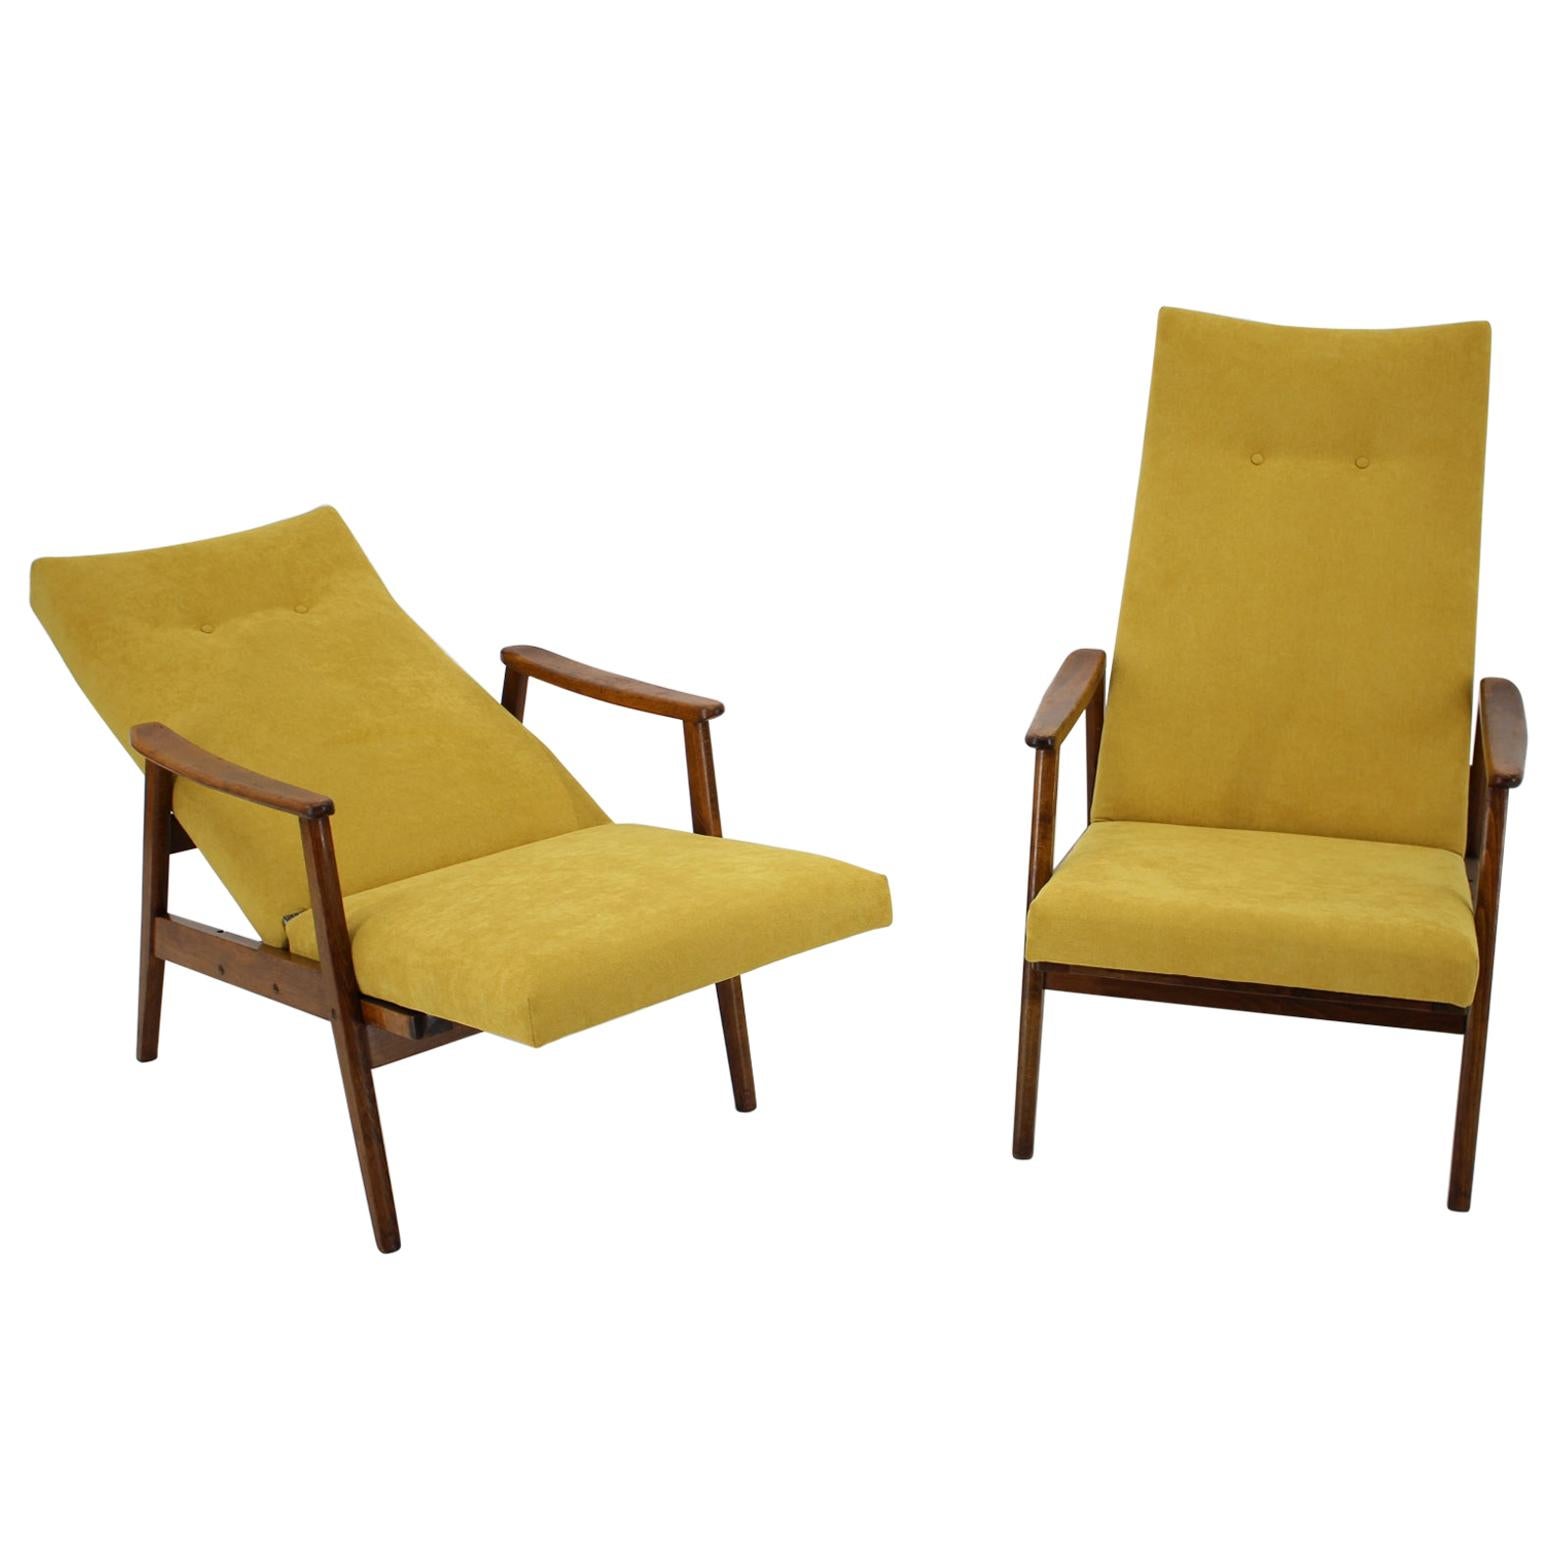 Set of Two Adjustable Armchairs, Thon, 1970